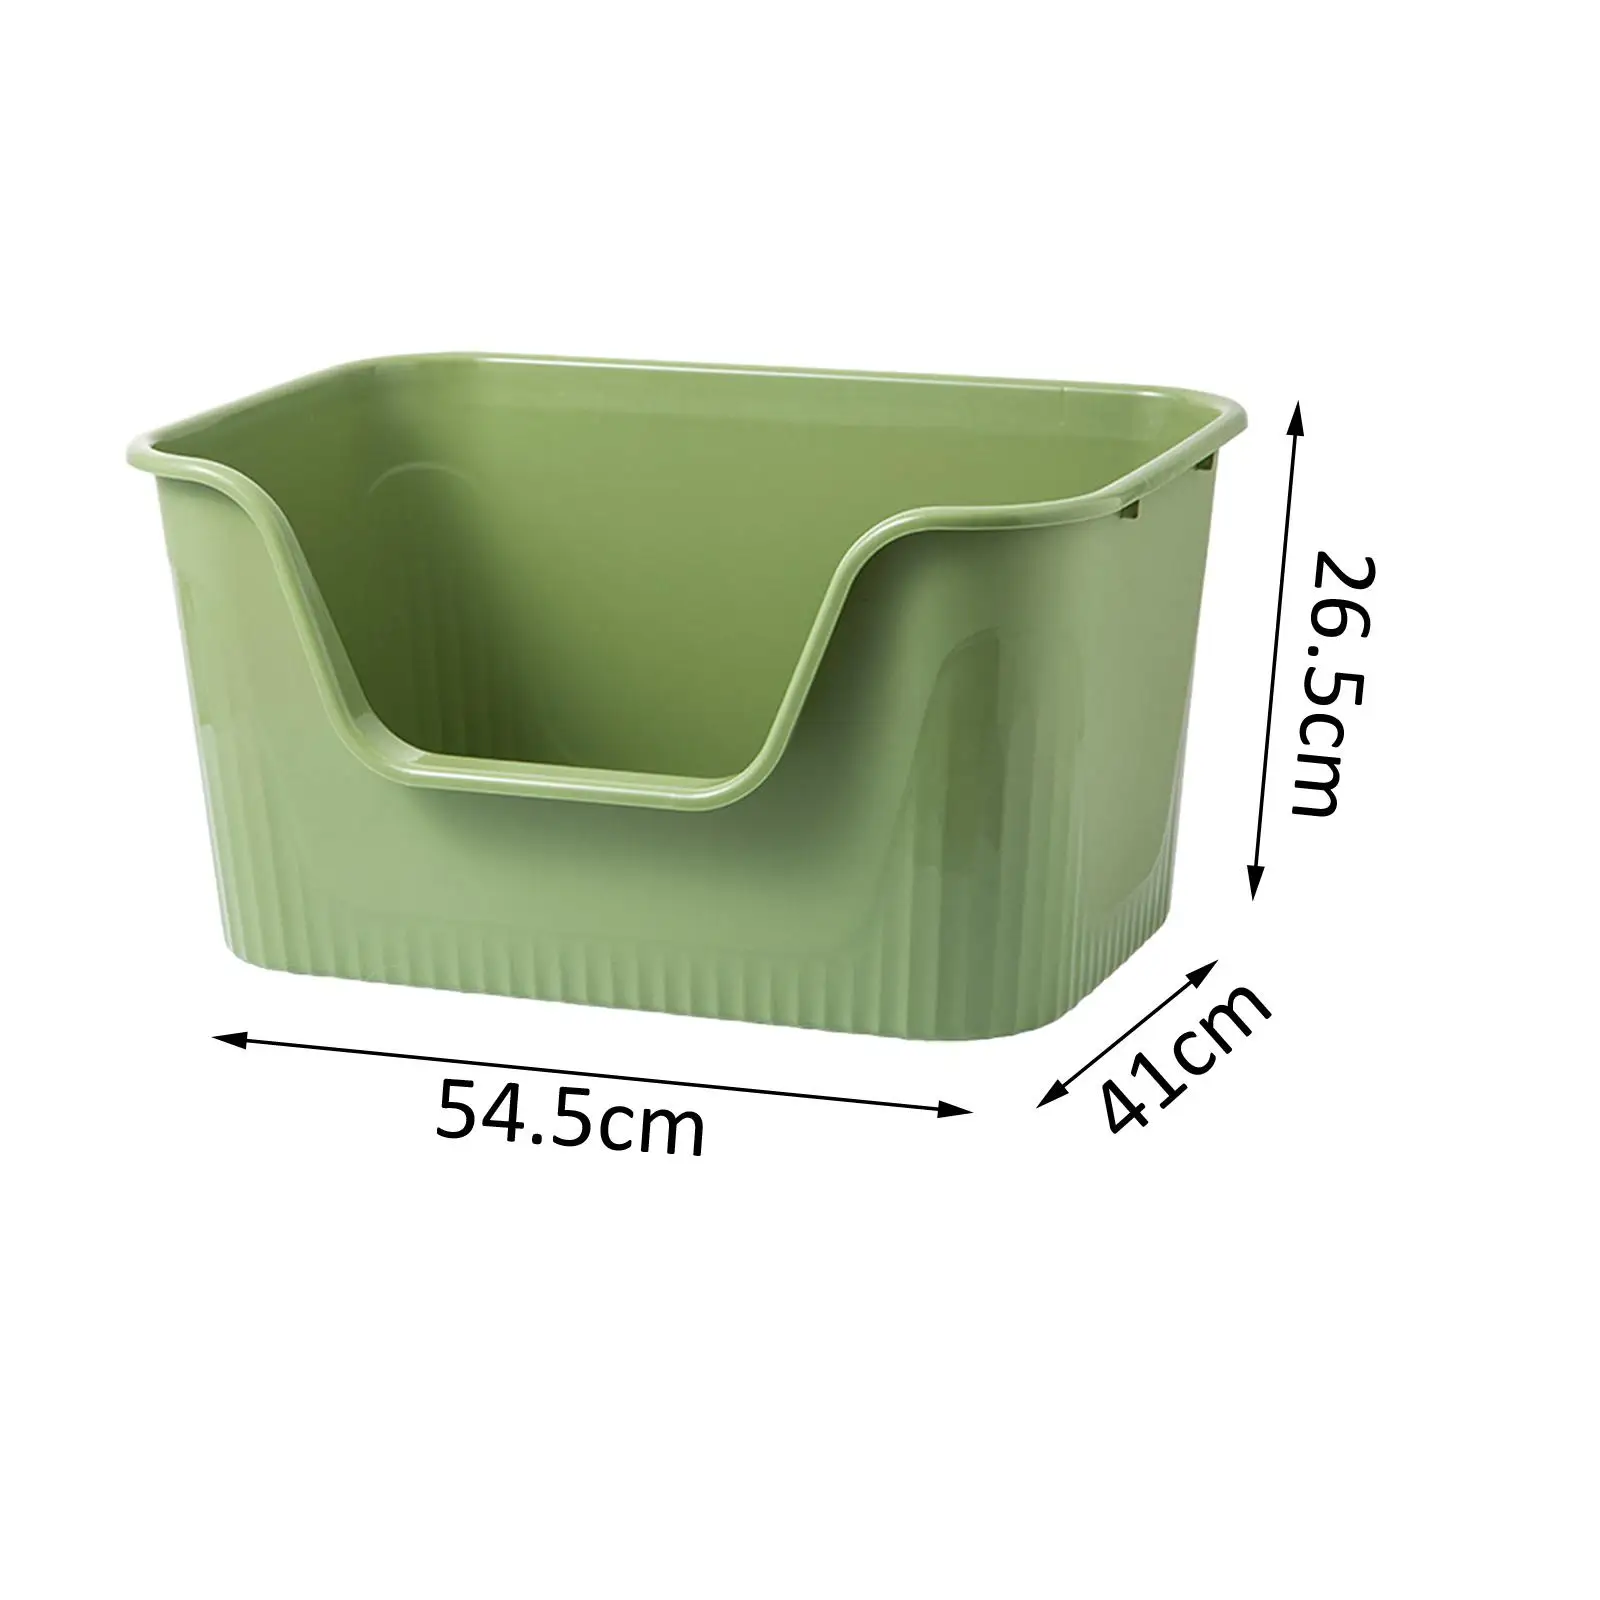 Open Top Pet Litter Boxes Cat Litter Container Bedpan U Shape Lowered Front